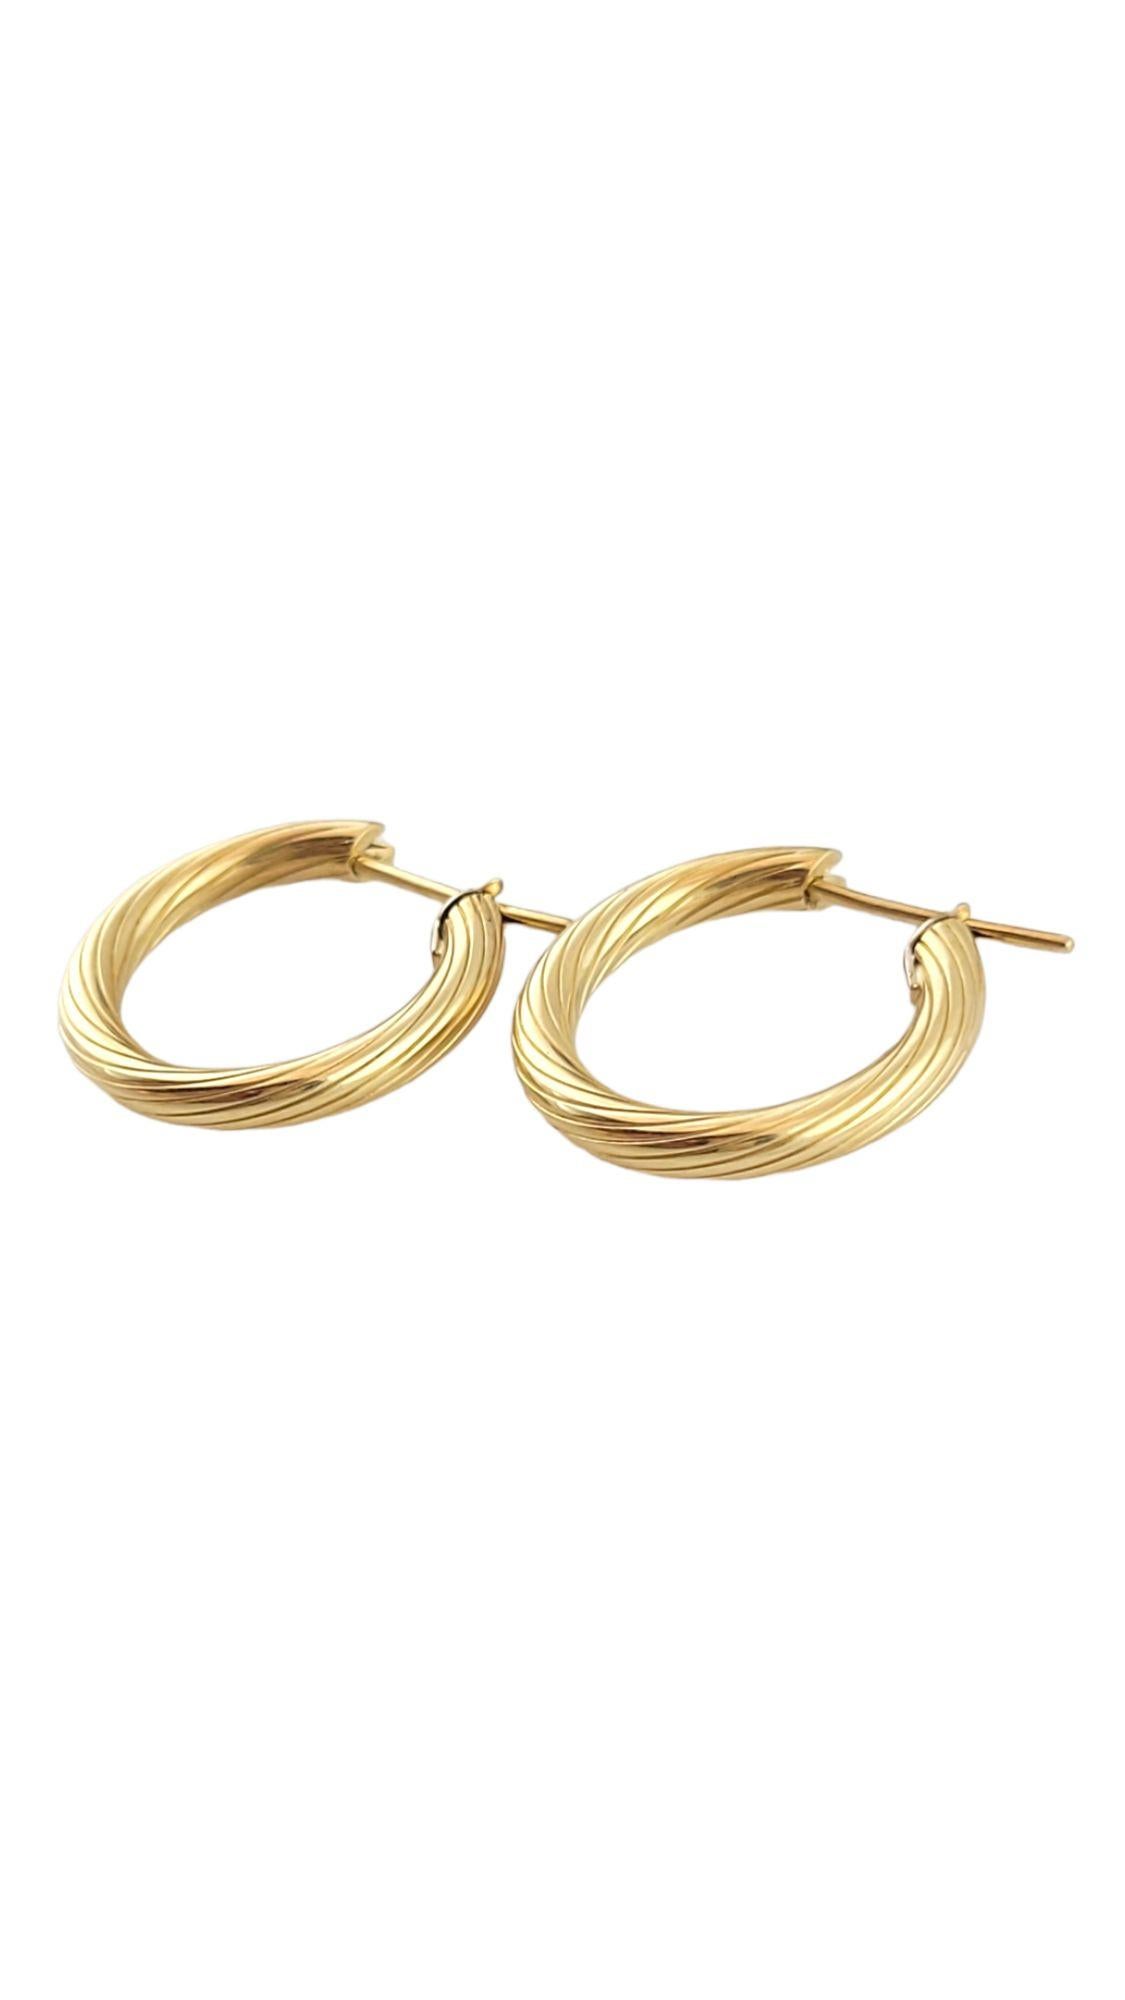 Gorgeous set of 18K gold hoops with a subtle and simple twisted texture!

Size: 20mm X 20.5mm X 3mm

Weight: 2.57 g/ 1.6 dwt

Hallmark: 750-TEC-ITALY

Very good condition, professionally polished.

Will come packaged in a gift box or pouch (when